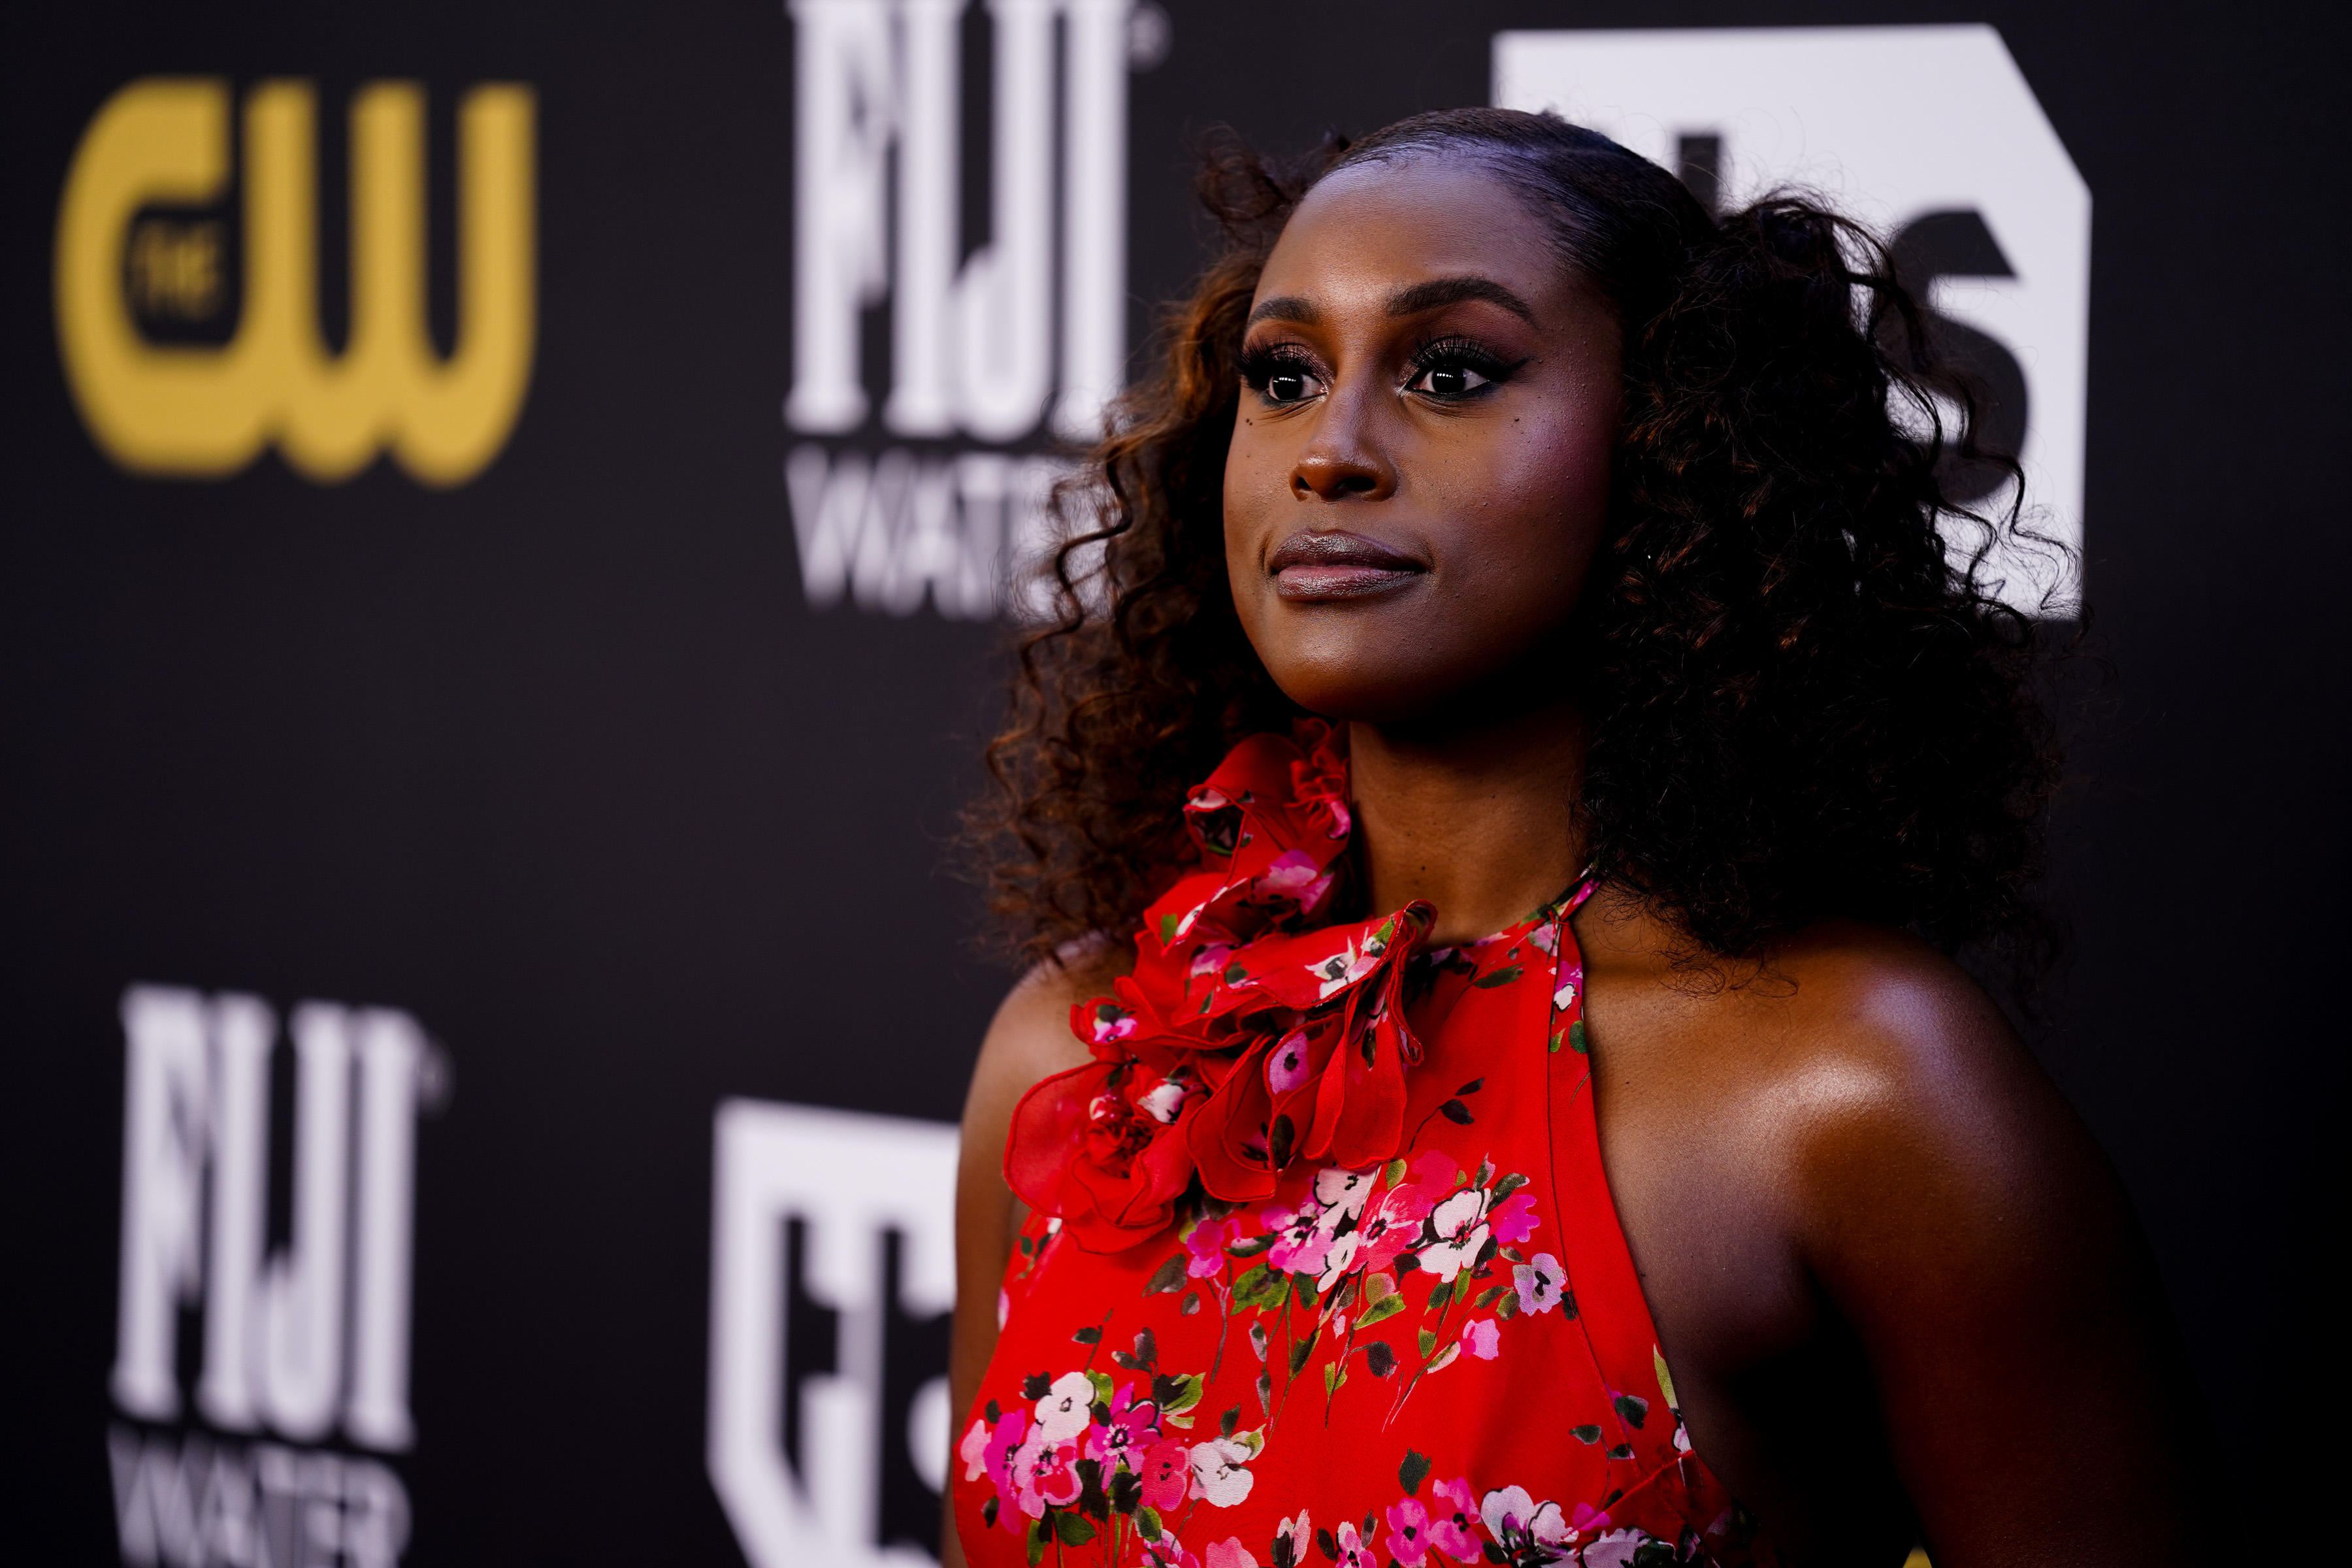 Issa Rae Dismisses Pregnancy Rumors: “Let A B**** Eat, Drink And Be Merry”